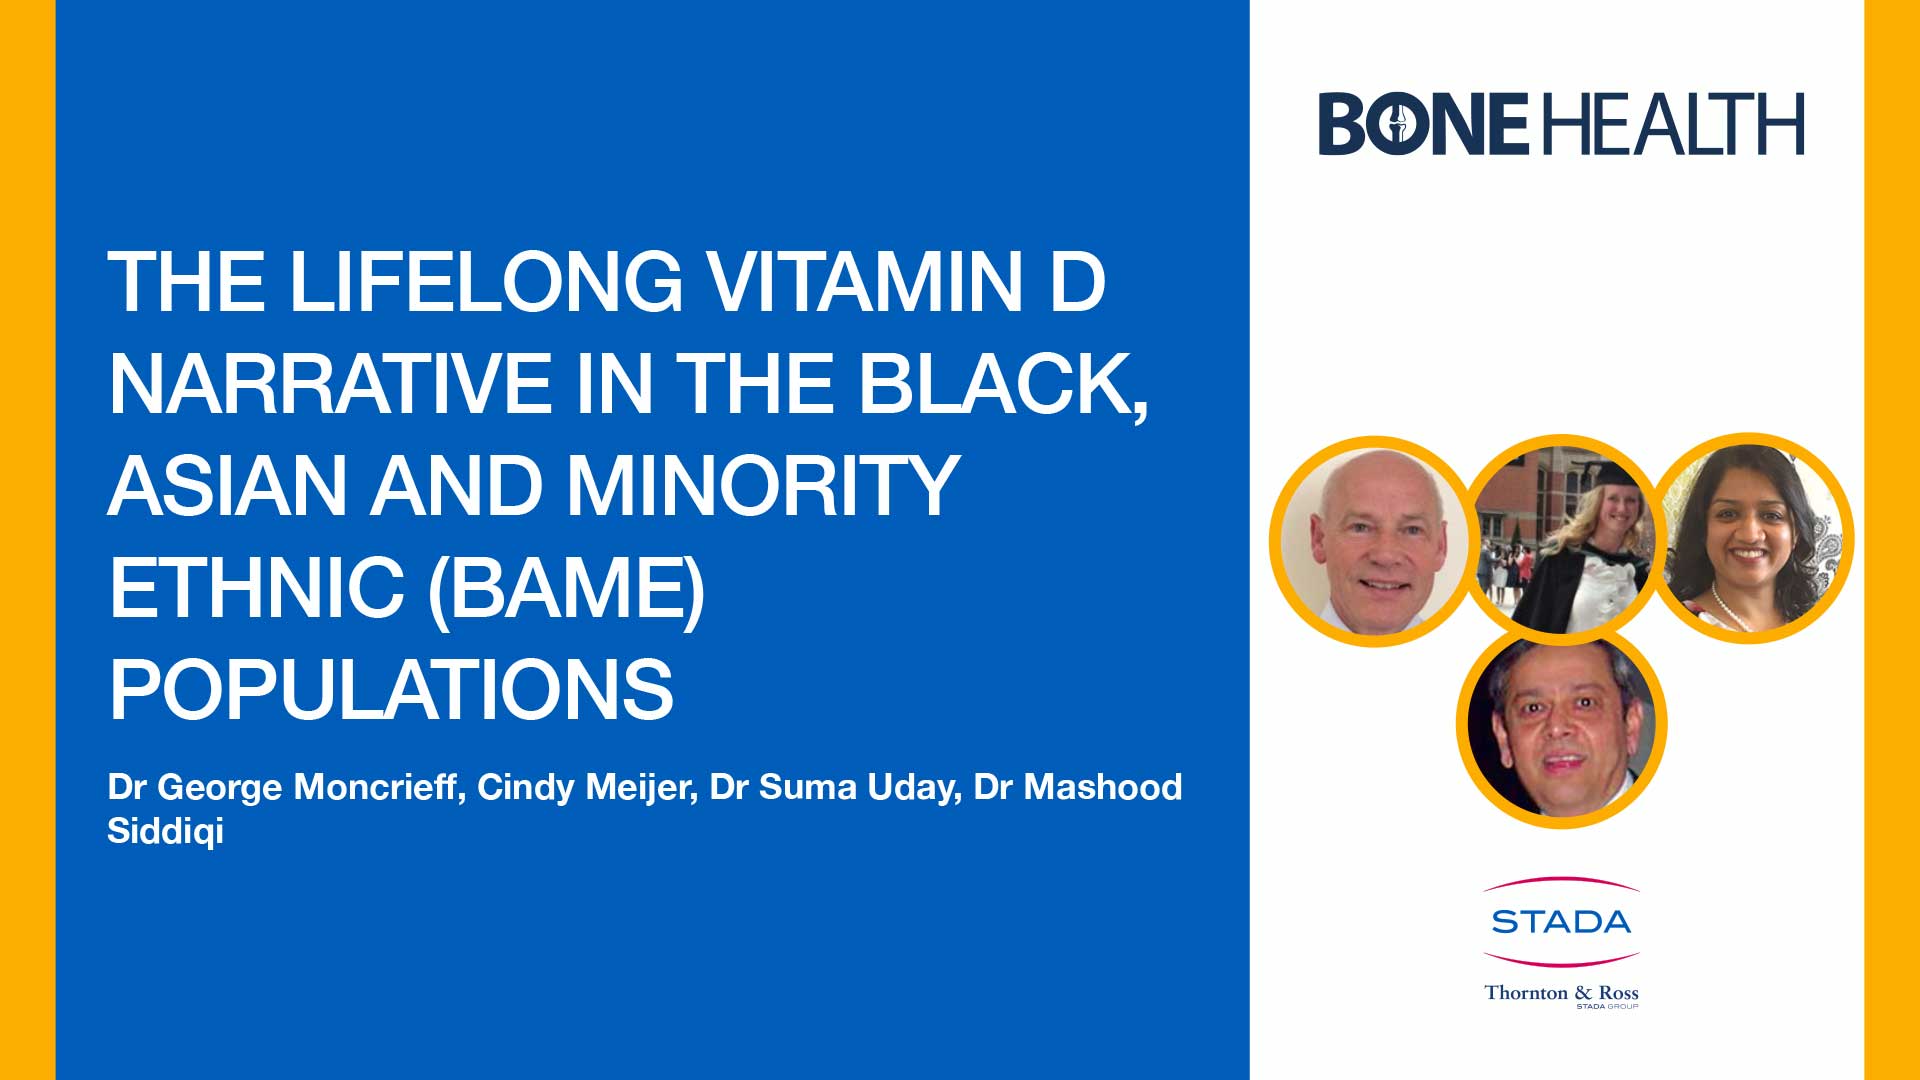 The Lifelong Vitamin D Narrative in the Black, Asian and Minority Ethnic (BAME) populations